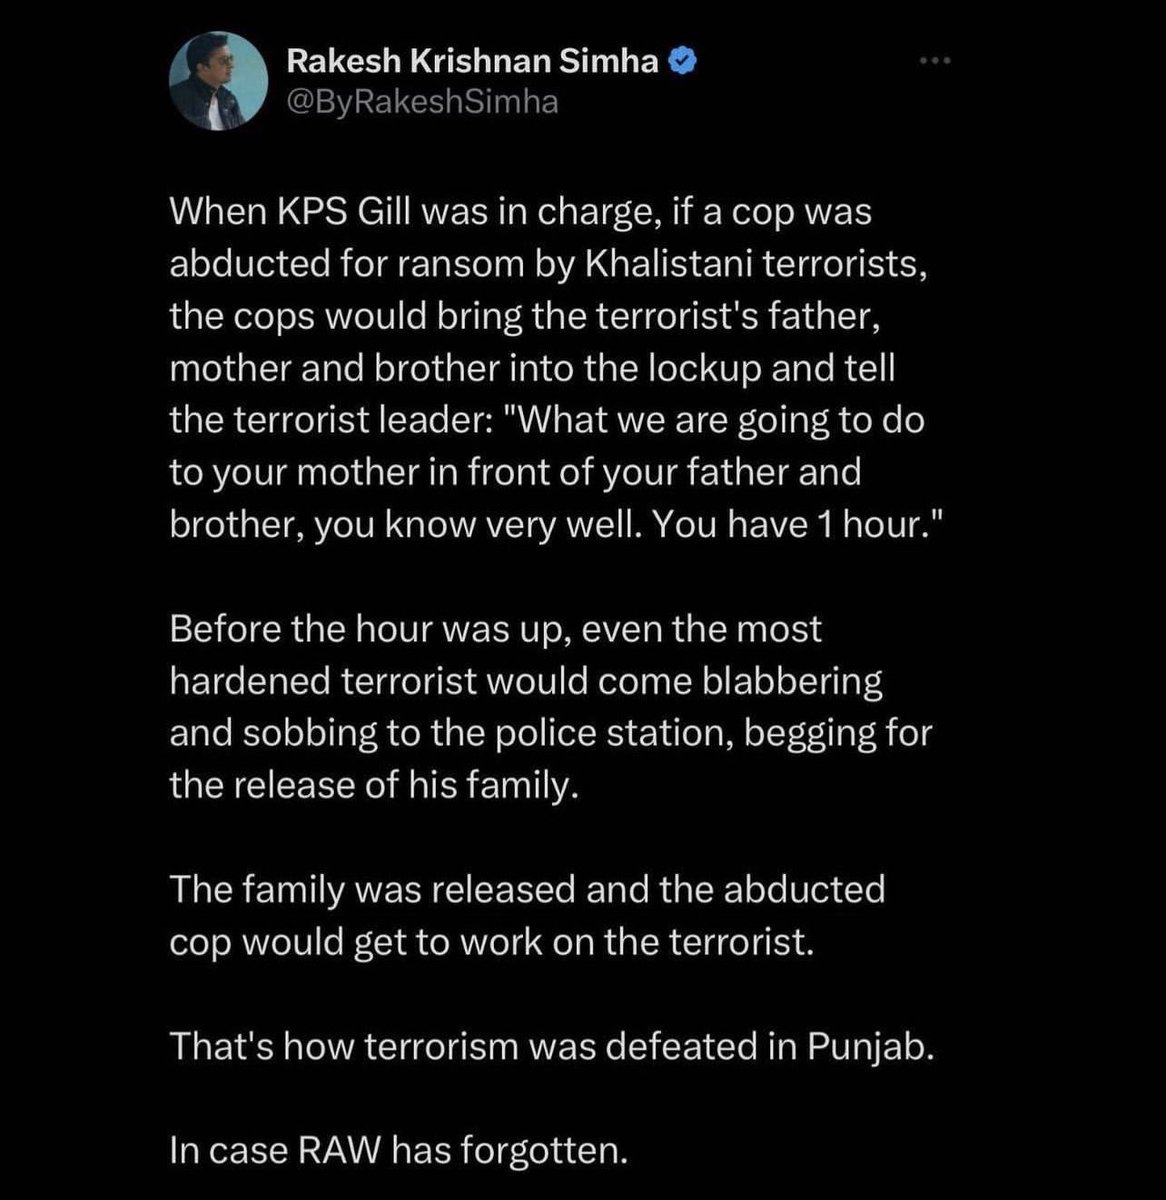 This Hindu Extremist is showing his own hate and also exposing how @PunjabPoliceInd stripped, raped or threatened to rape Sikh women in their custody in 1980s & 90s. This is what Human rights body & Sikhs have been saying & now a hate filled Hindu extremist confirms it.…